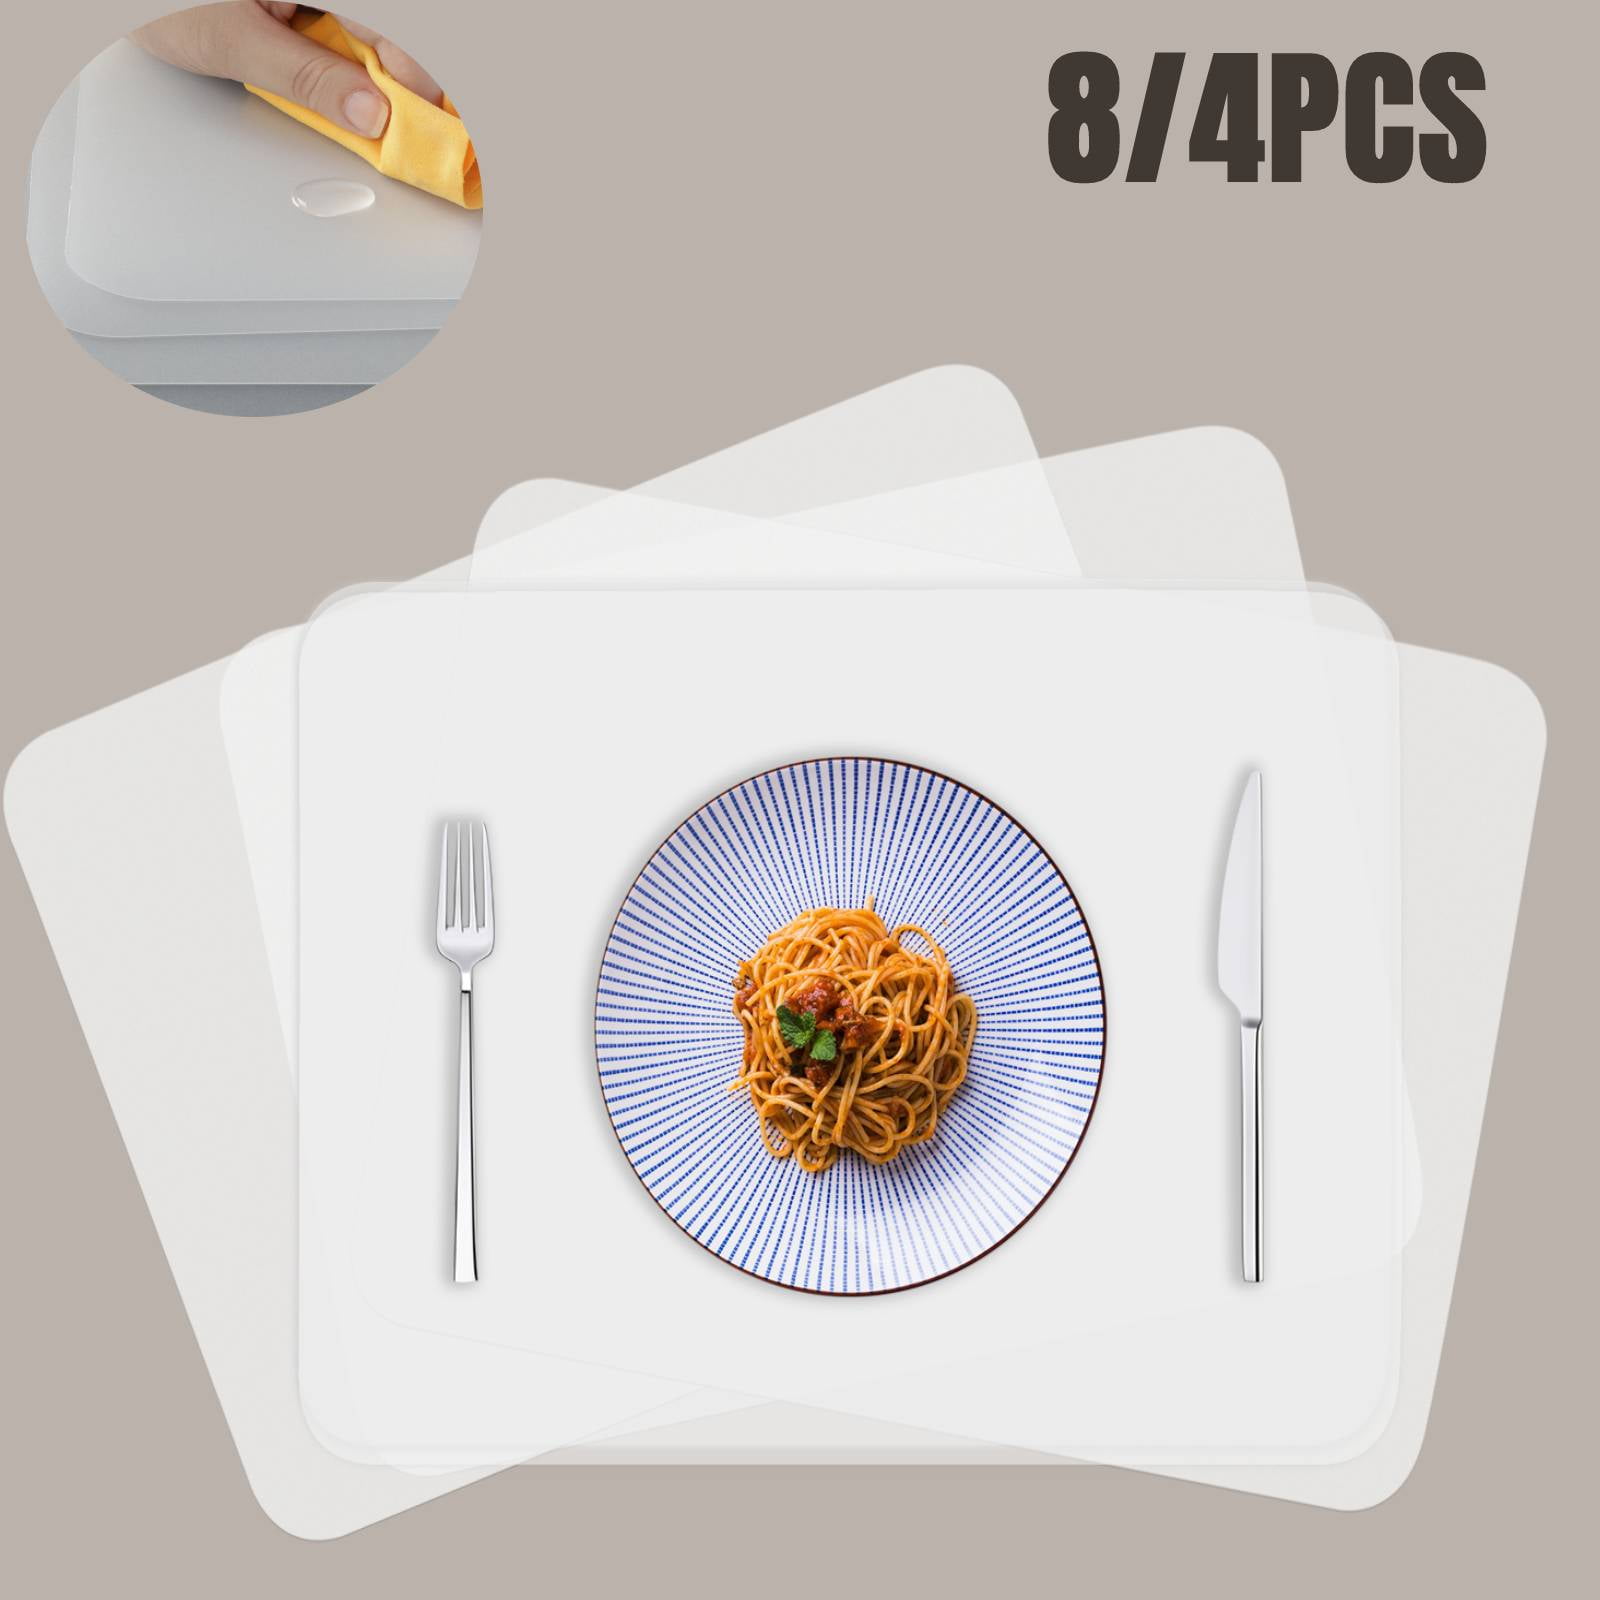 Details about   Waterproof Insulation Bowl Cotton Mat Placemat Table Dining Protector Kitchen US 